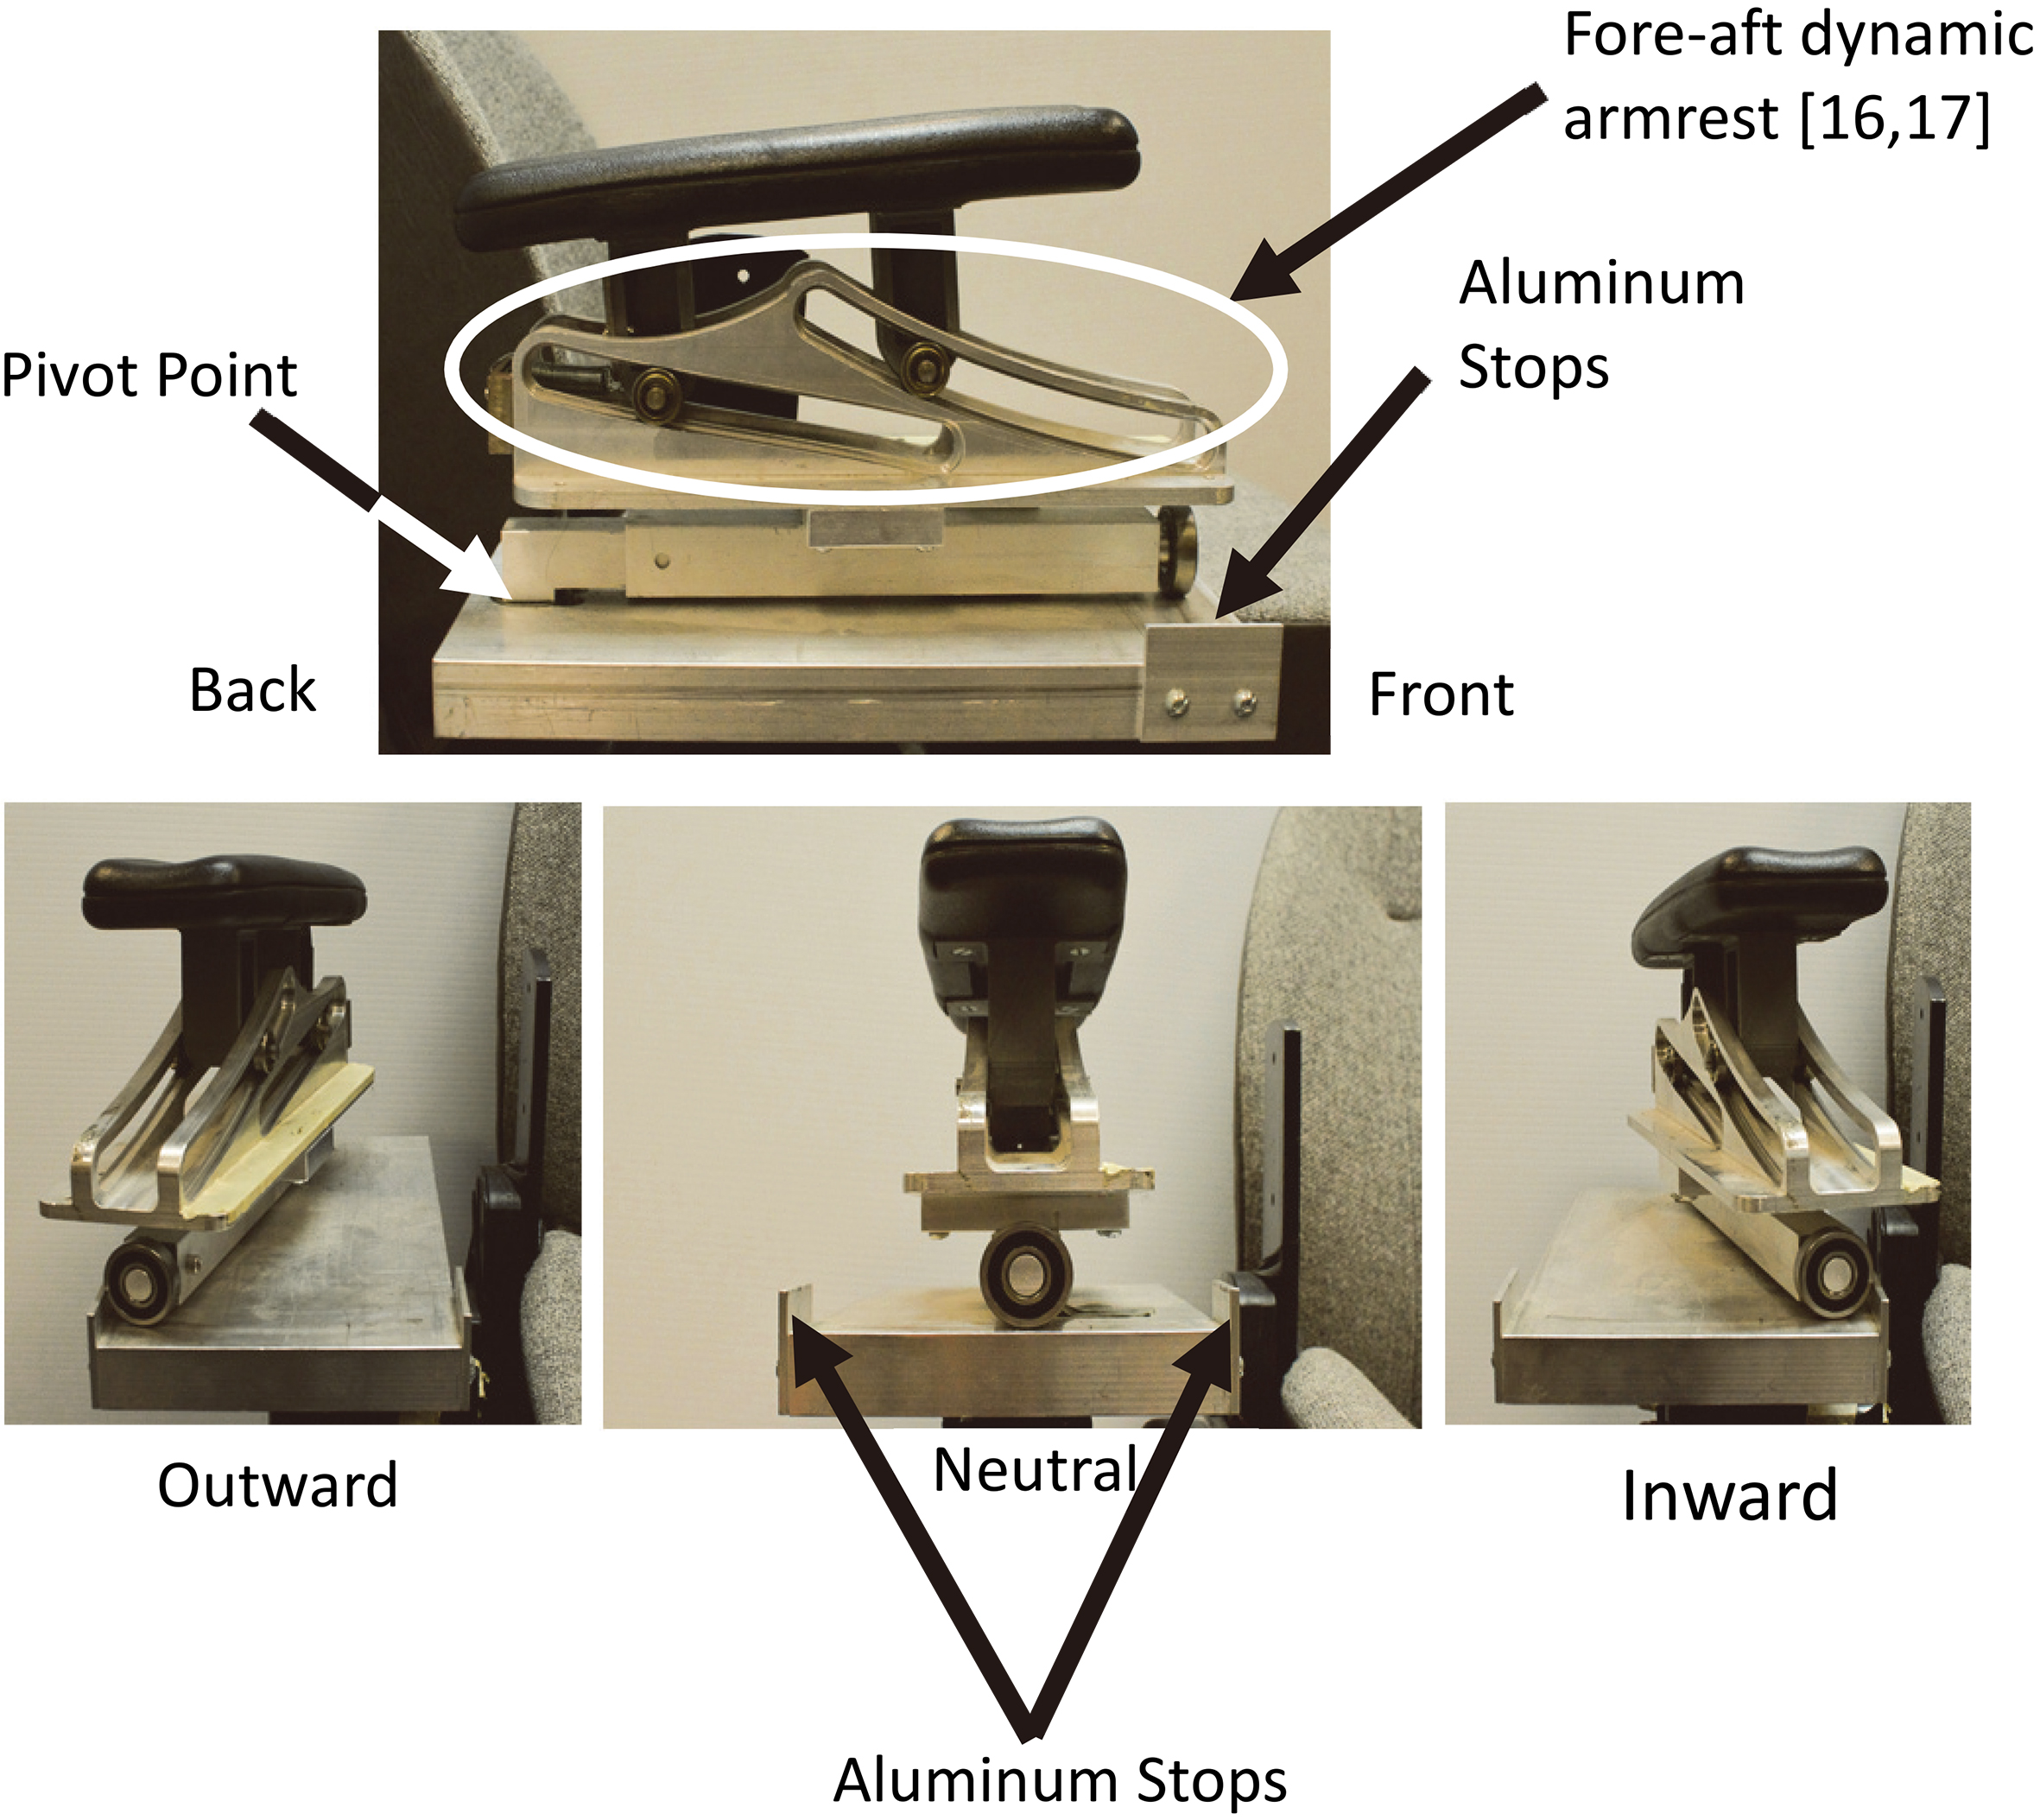 Final product, horizontally dynamic armrest with fore-aft dynamic armrest mounted above. Top figure – Side view; Bottom figure – Front view – from left to right – outward, neutral, inward locations.